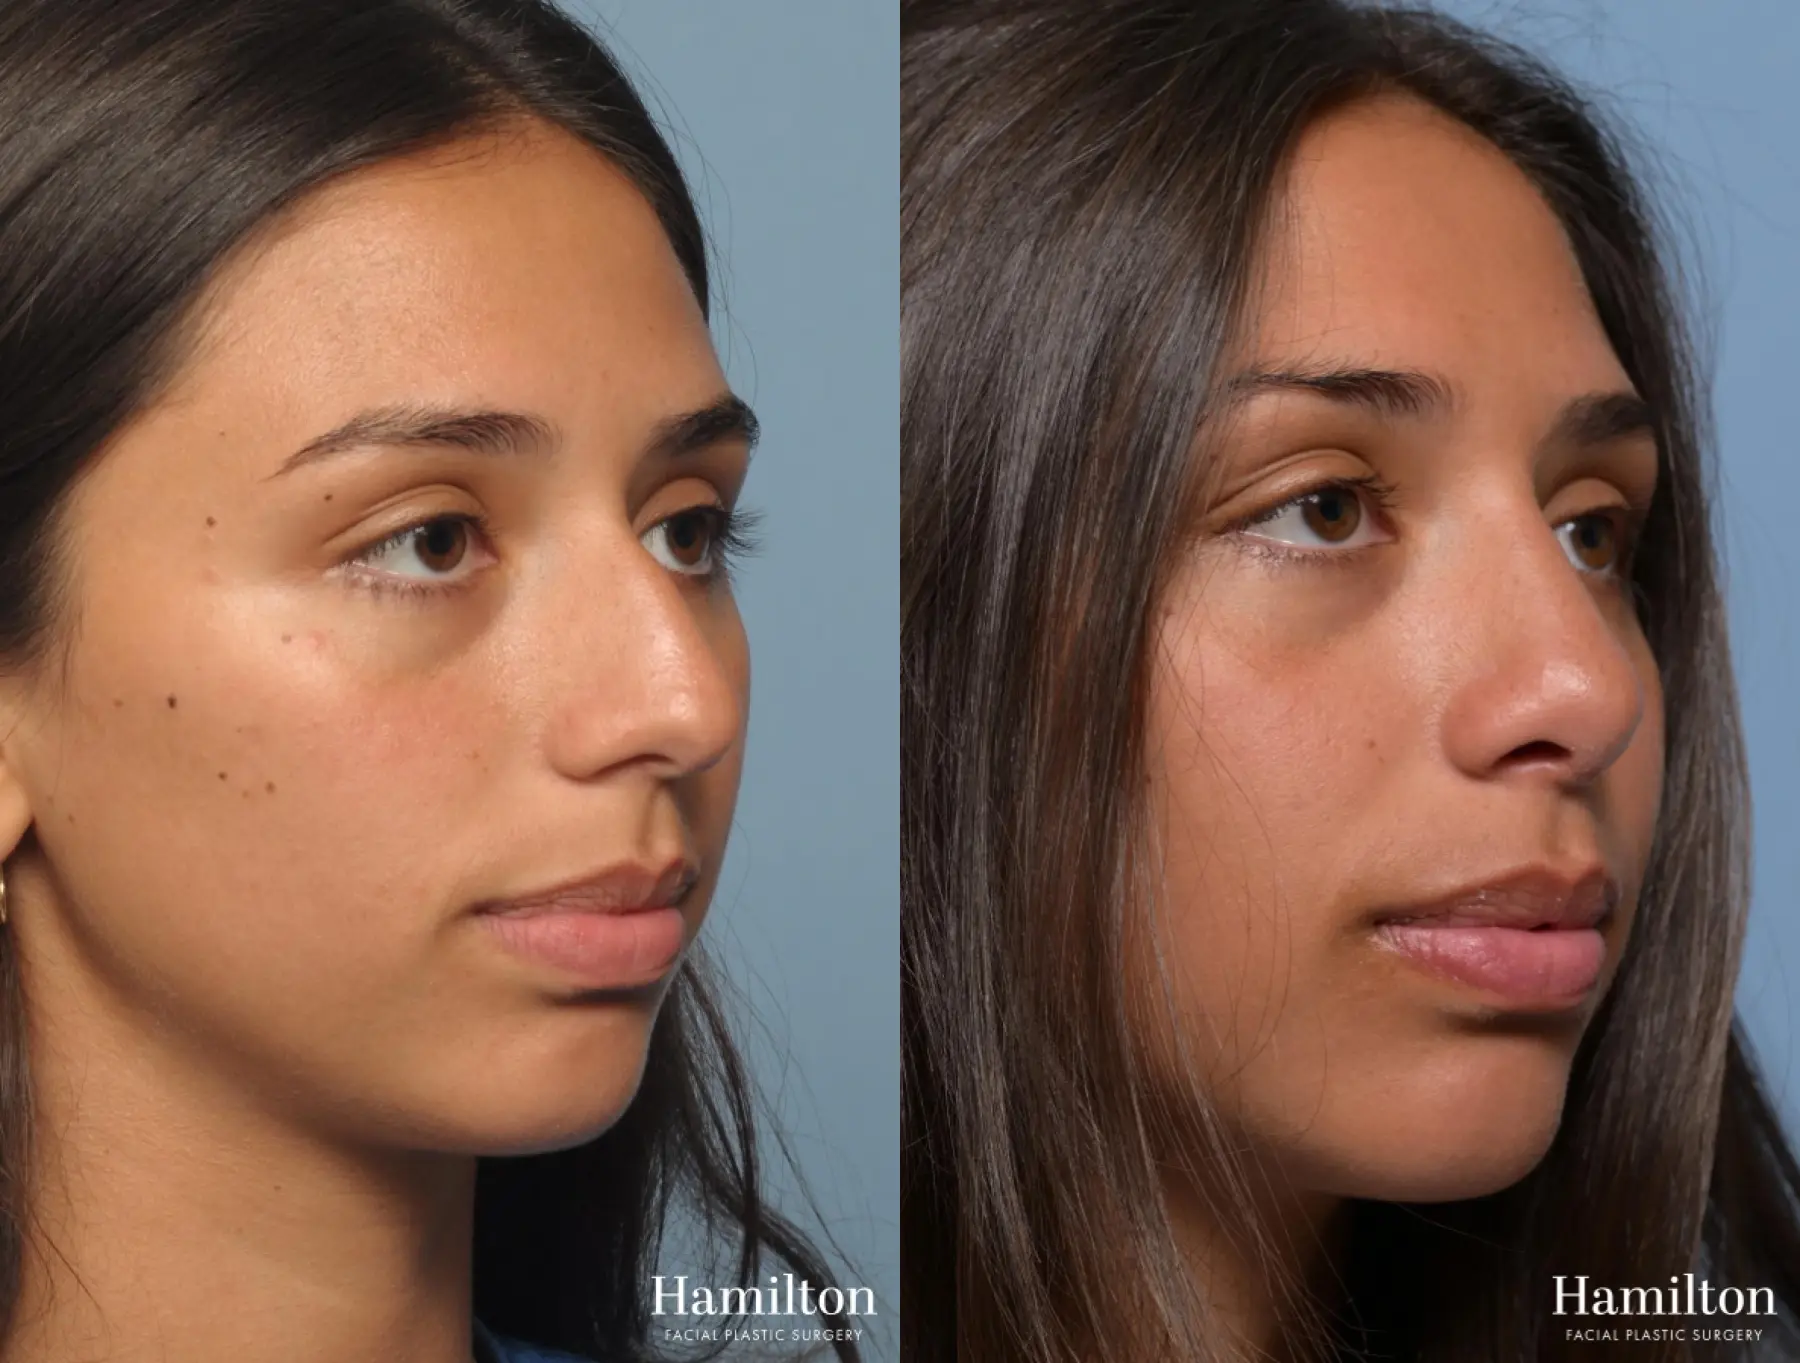 Rhinoplasty: Patient 2 - Before and After 4